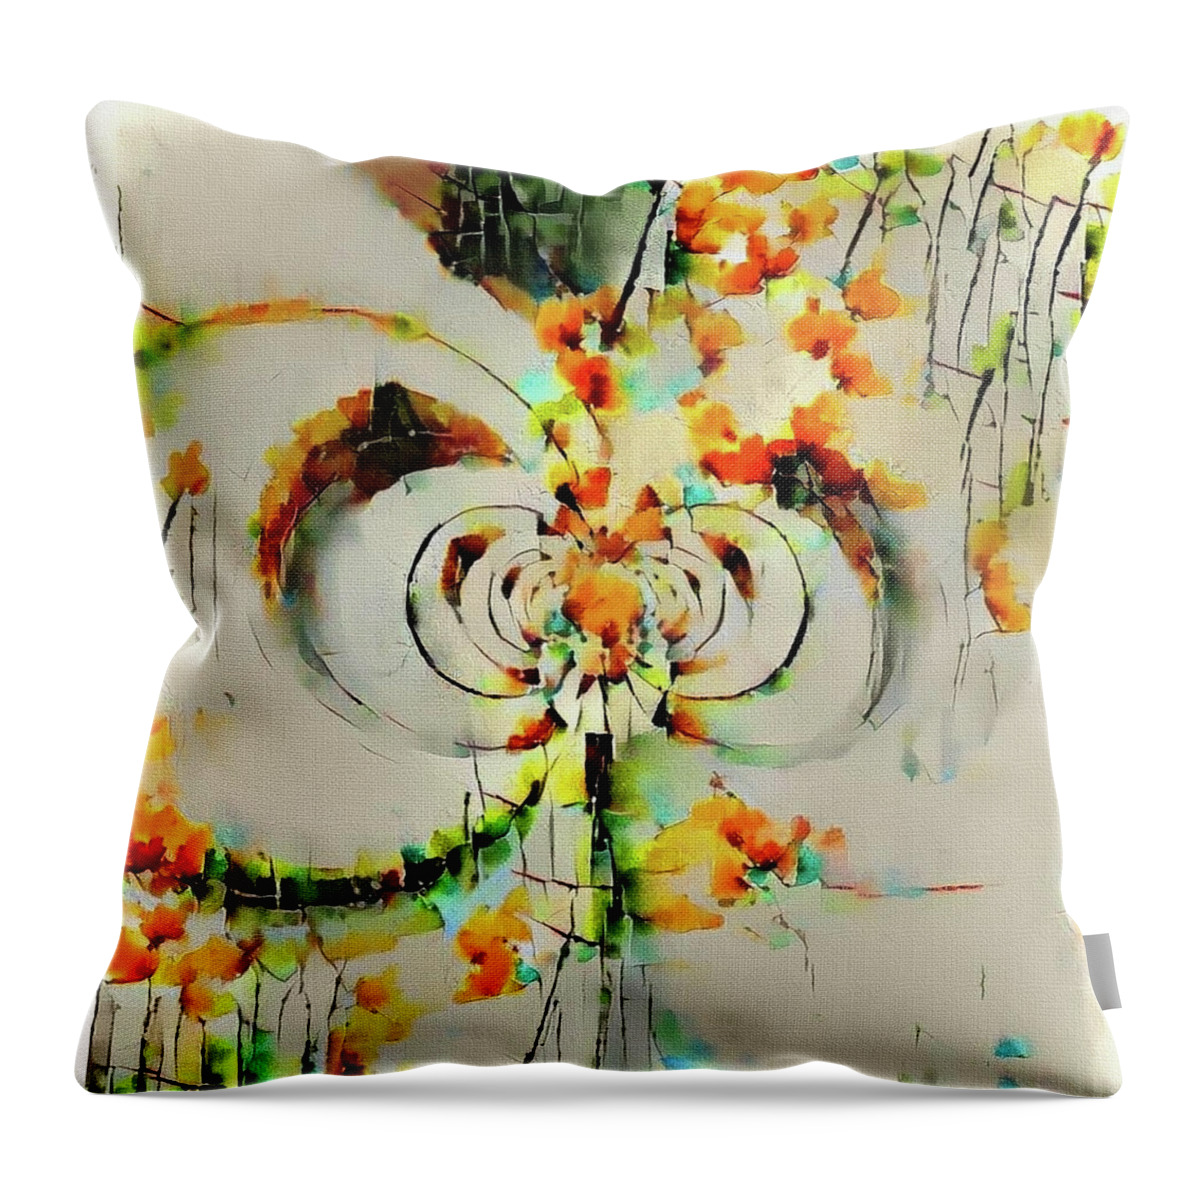 Abstract Throw Pillow featuring the digital art Tender Autumn Colors by Bruce Rolff